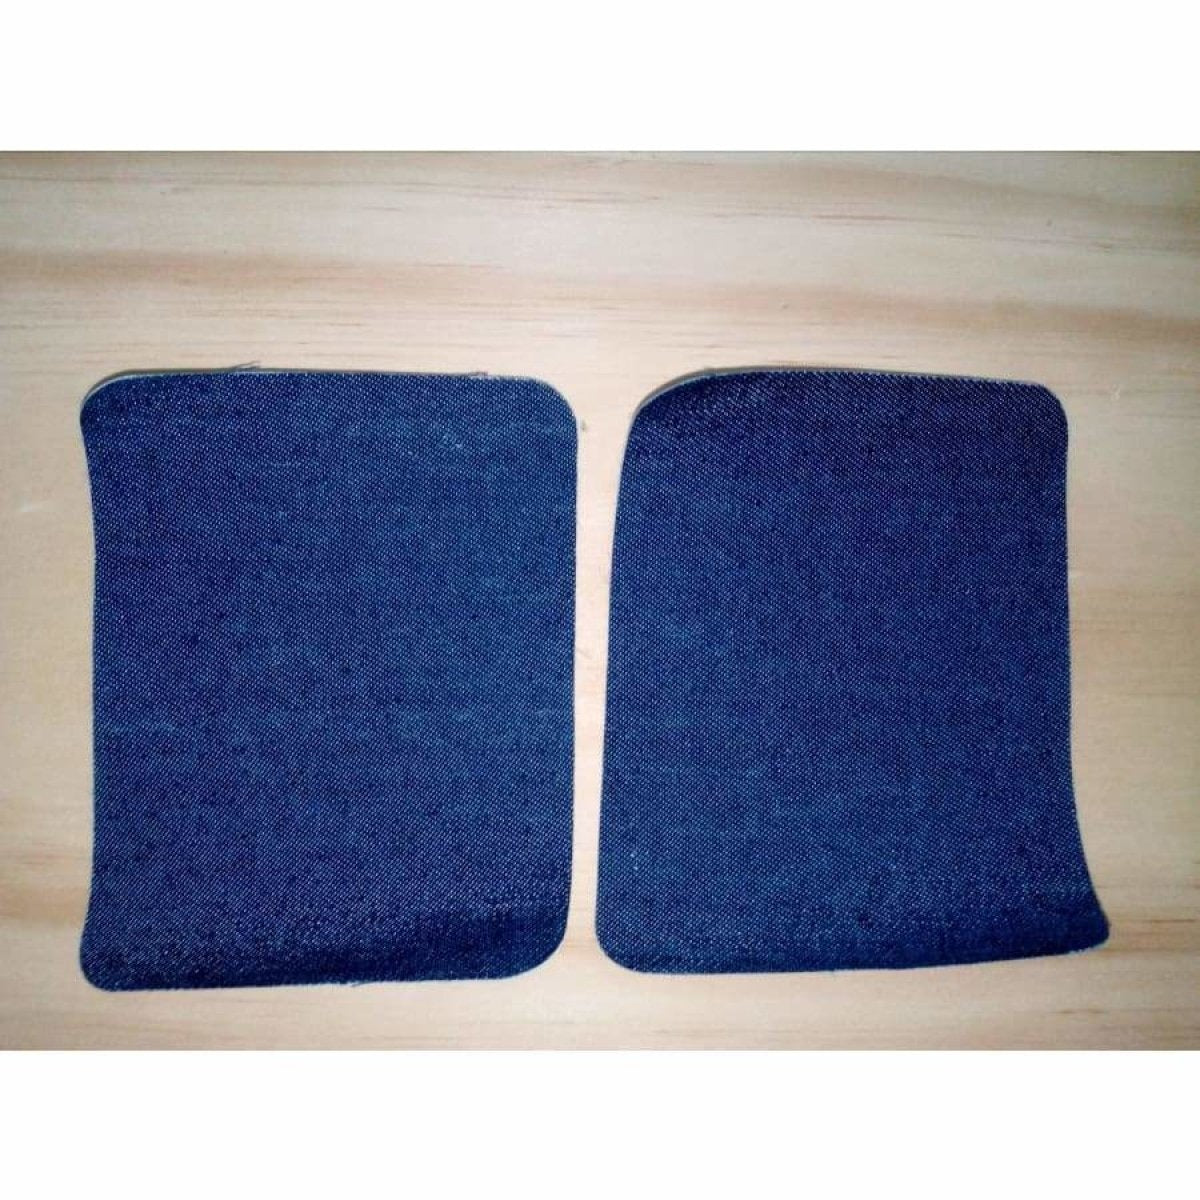 2pcs Iron-on Fabric Blue Black Denim Jeans Clothing Jacket Patch Patches Repair Sewing Shapes - 12.5x9.5cm Blue E - - Asia Sell